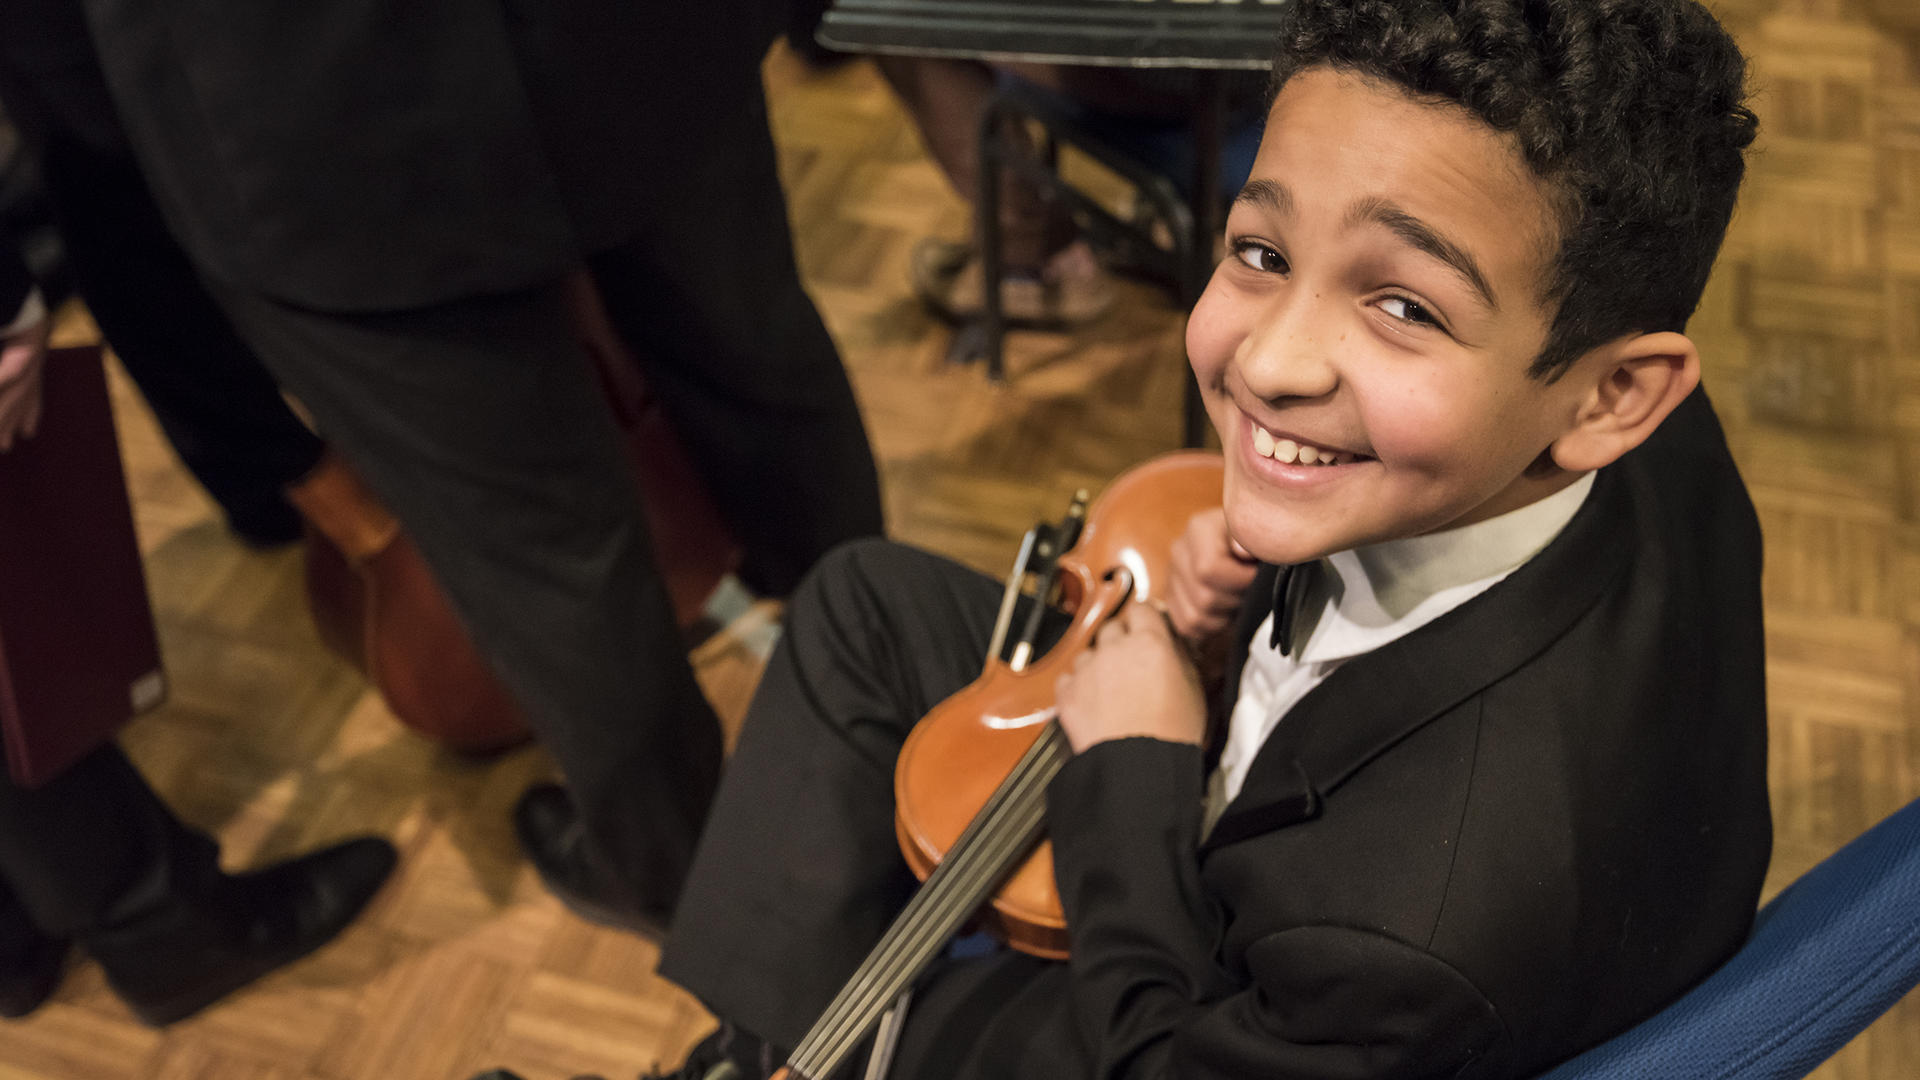 Smiling Violinist waits to play